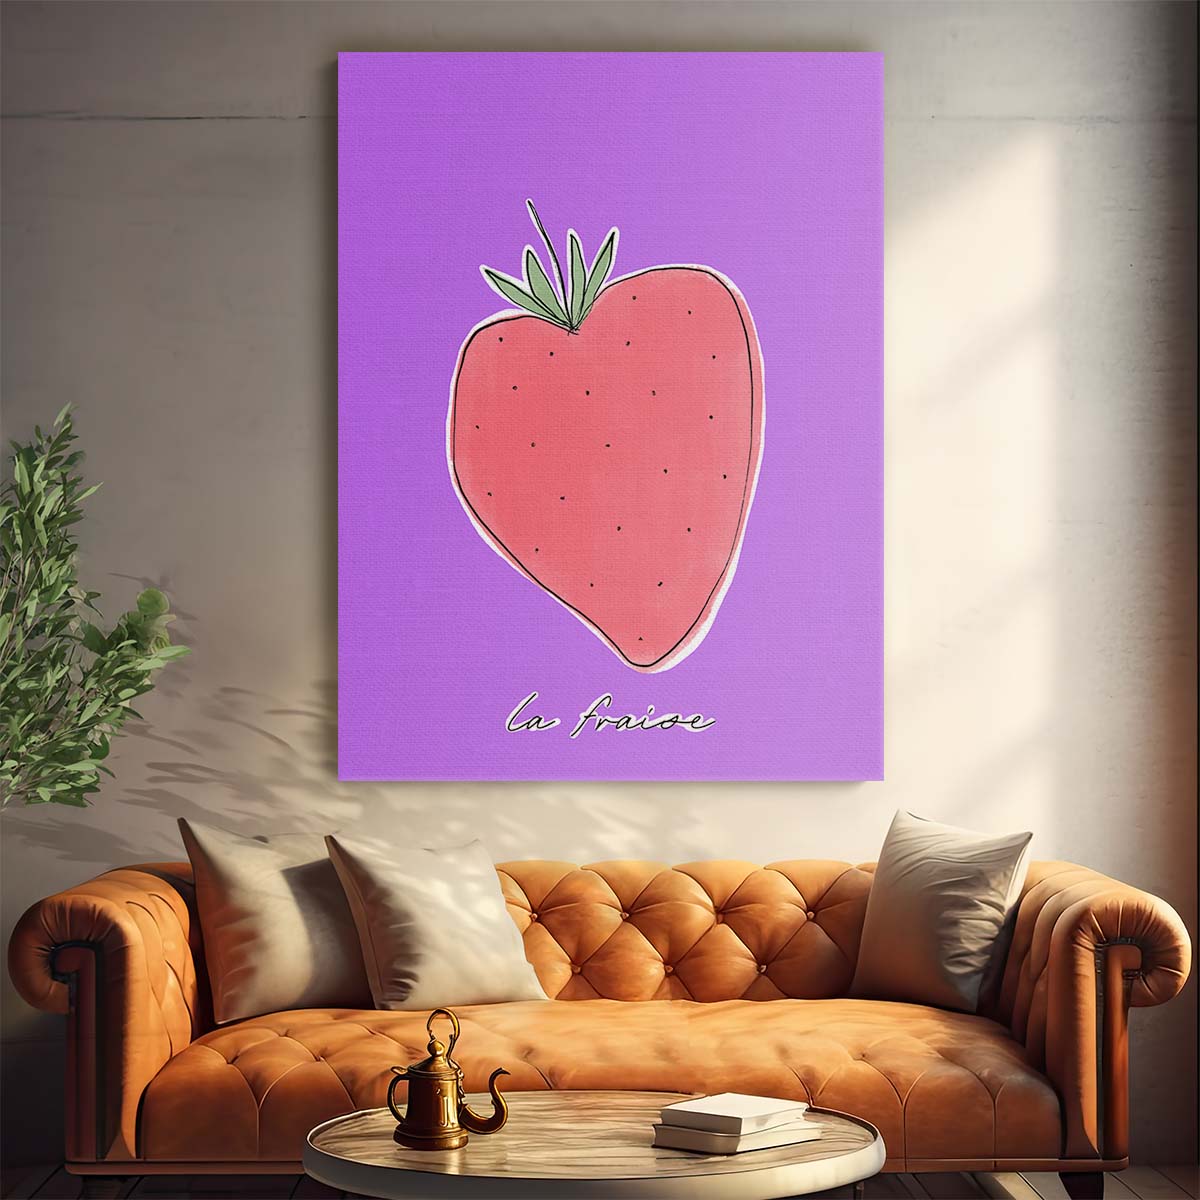 La Fraise Strawberry Illustration, French Kitchen Abstract Art by Luxuriance Designs, made in USA